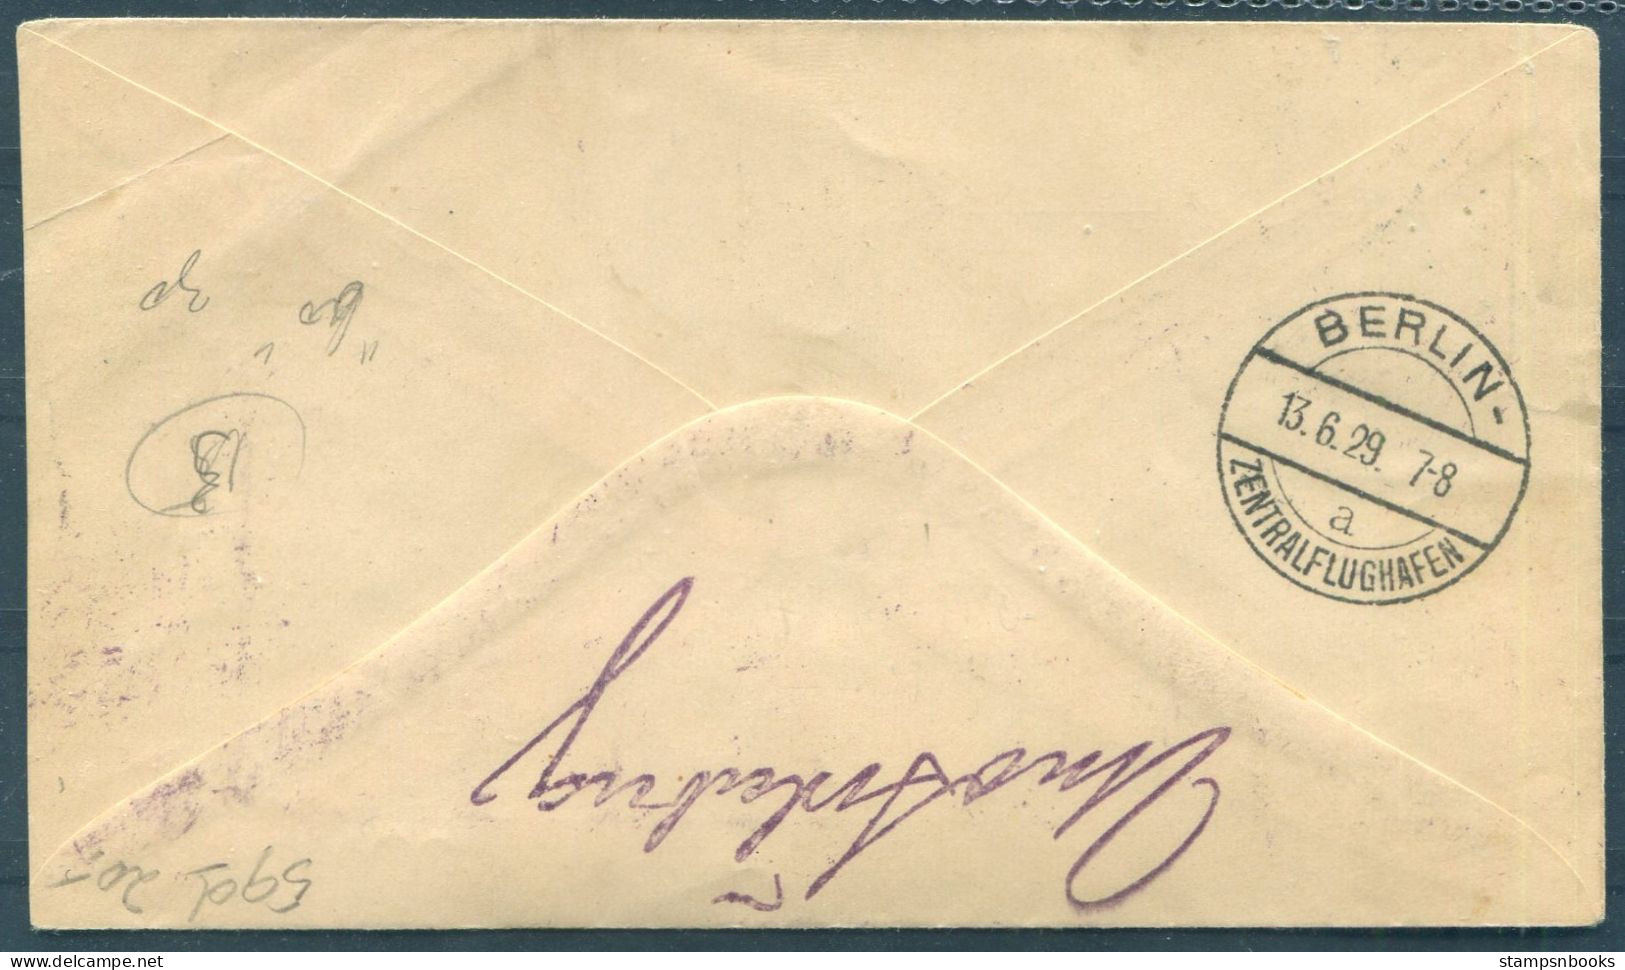 1929 Sweden Registered Stockholm - Wien Austria Via Berlin Germany Airmail 13th Night Flight Cover. Stockholm/Amsterdam  - Covers & Documents